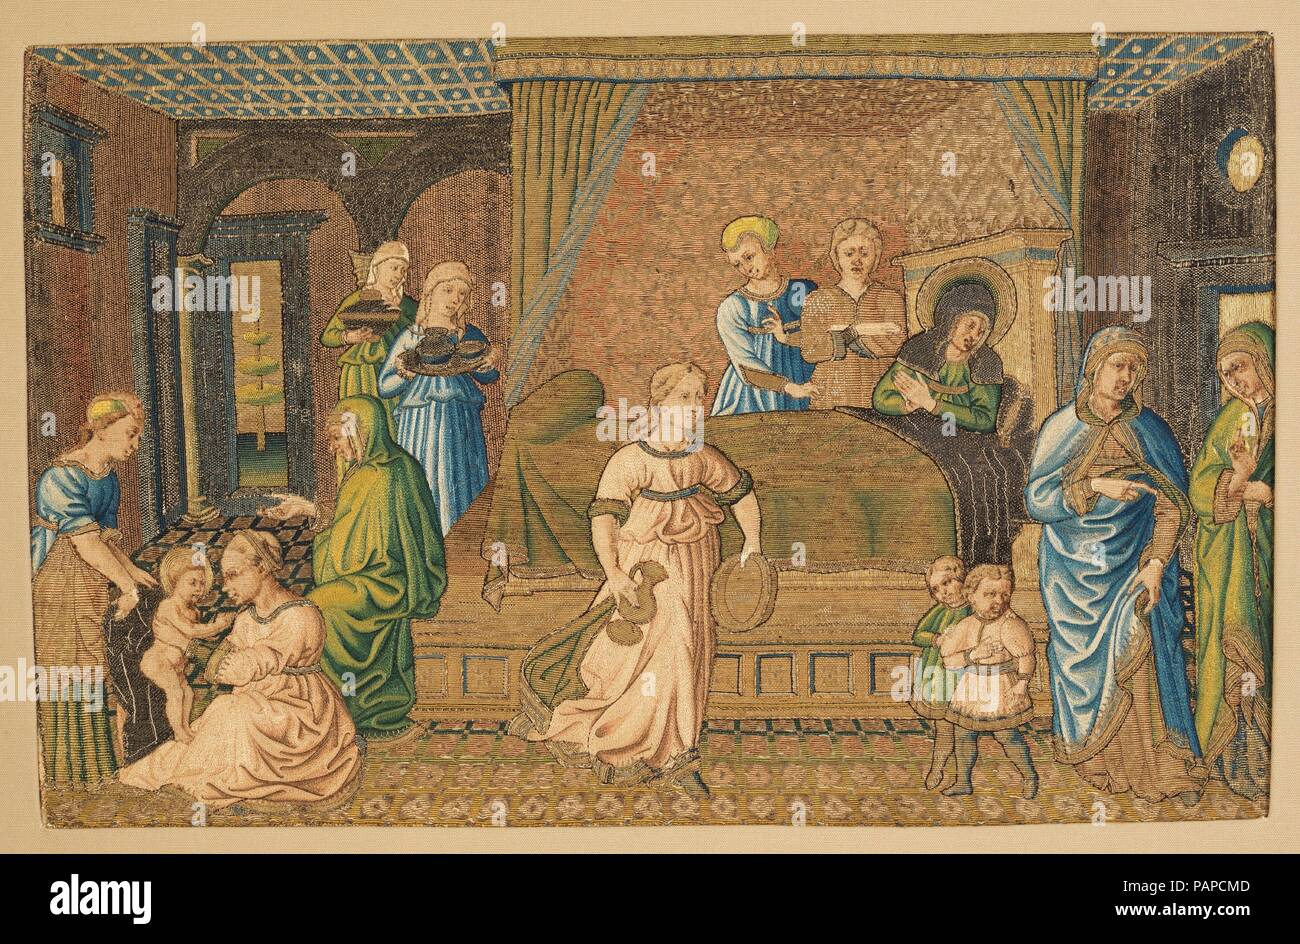 The Birth of John the Baptist. Culture: Italian, probably Florence. Designer: Design attributed to Benozzo Gozzoli (Benozzo di Lese di Sandro) (Italian, Florence ca. 1420-1497 Pistoia). Dimensions: H. 12 3/4 x W. 19 1/2 inches (32.4 x 49.5 cm). Date: 1460-80.  This embroidered panel, called an apparel, was part of the decoration of a priest's dalmatic. Or nué refers to the technique of embroidering colored silk threads over metal threads. Museum: Metropolitan Museum of Art, New York, USA. Stock Photo